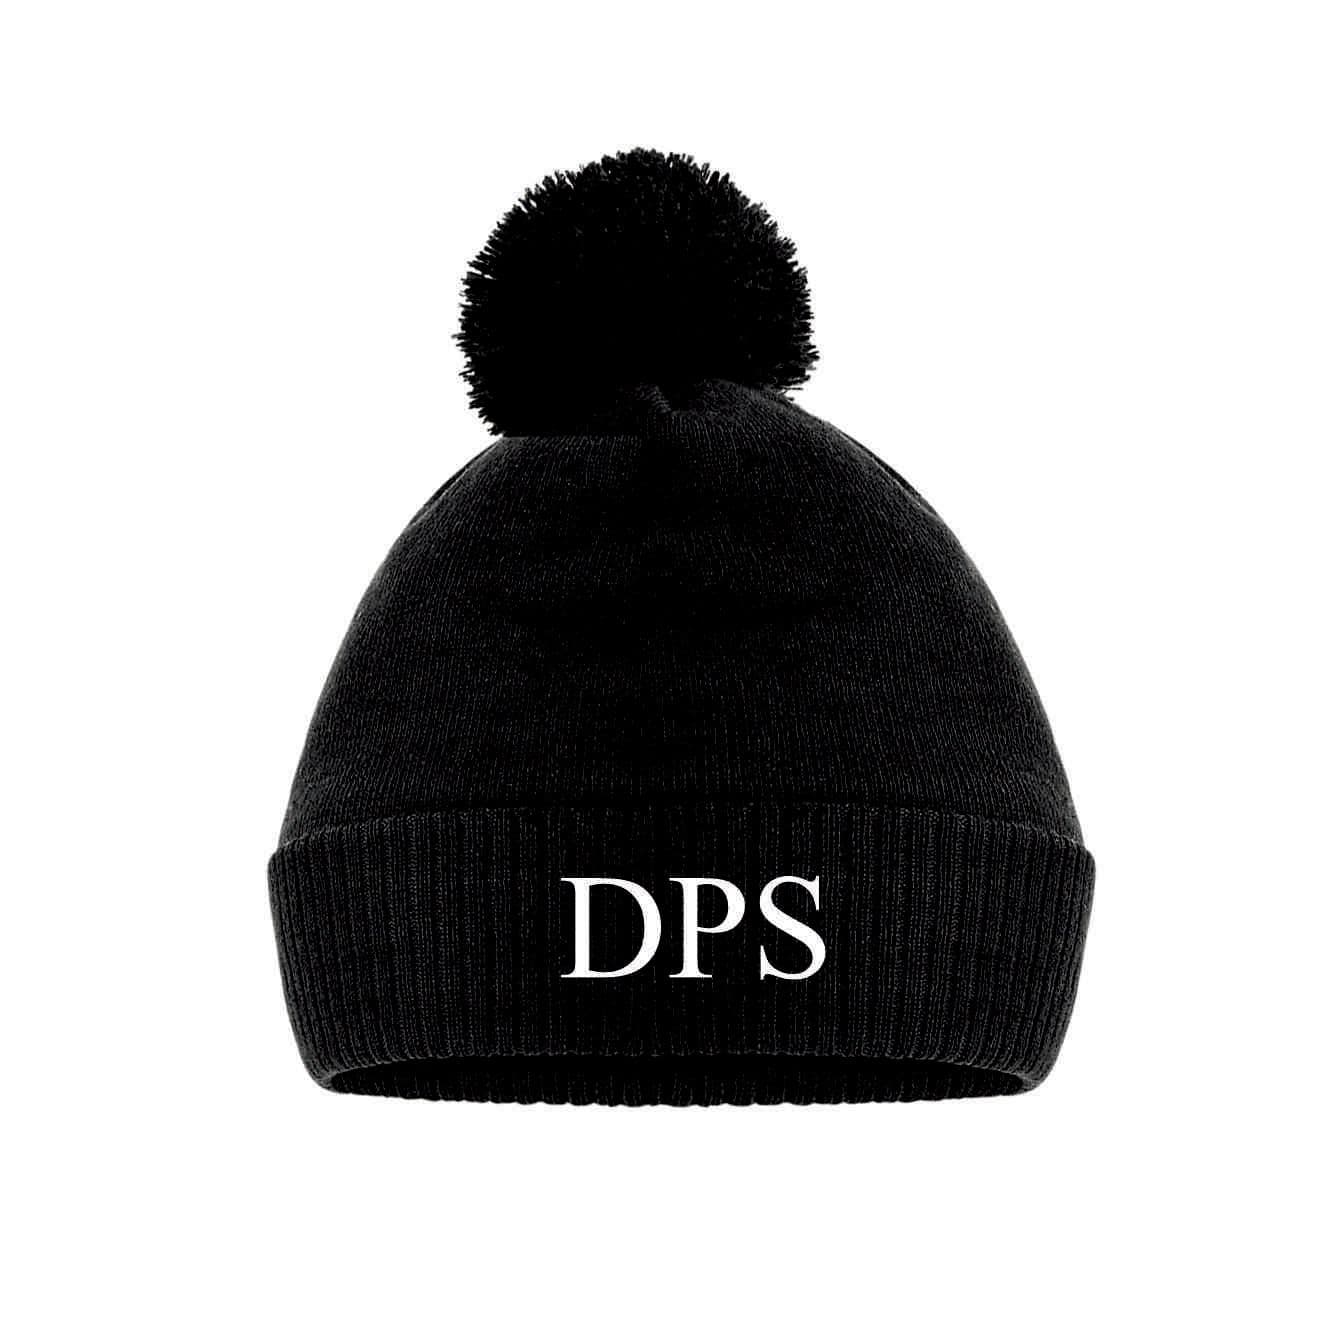 DPS Thermal Bobble Hat